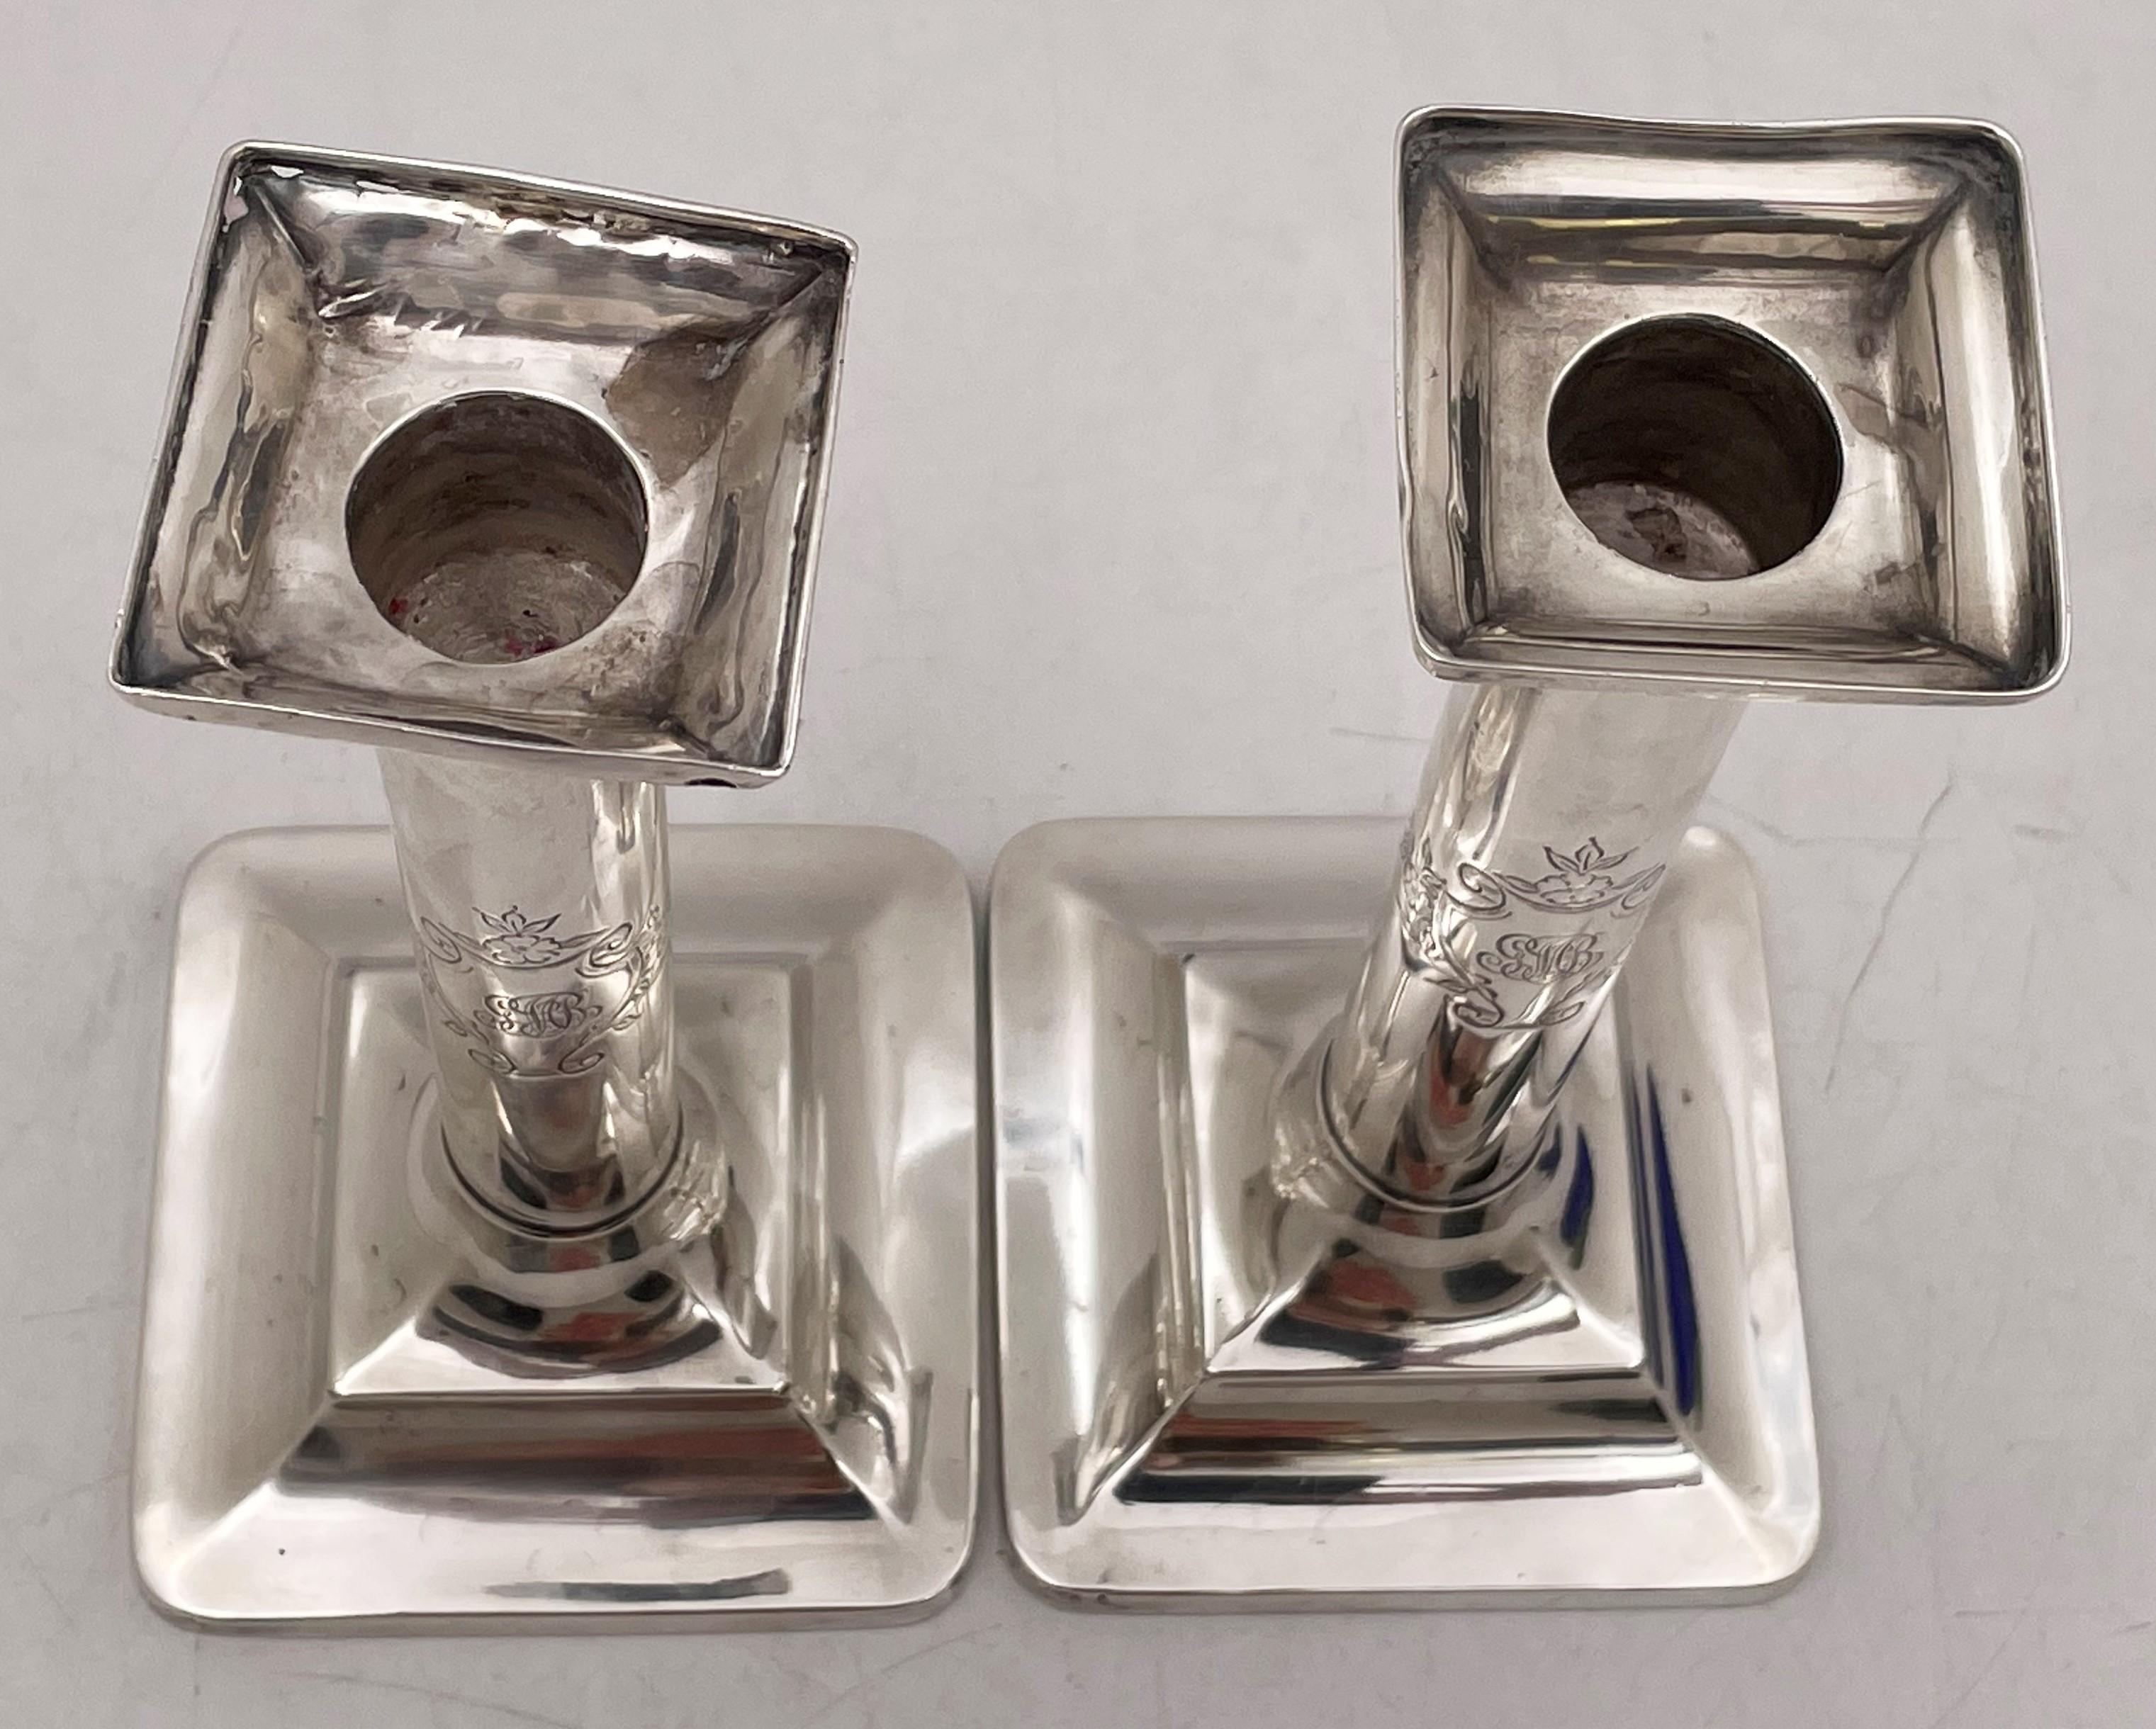 Pair of Tiffany & Co. Sterling Silver Candlesticks from 1903 In Good Condition For Sale In New York, NY